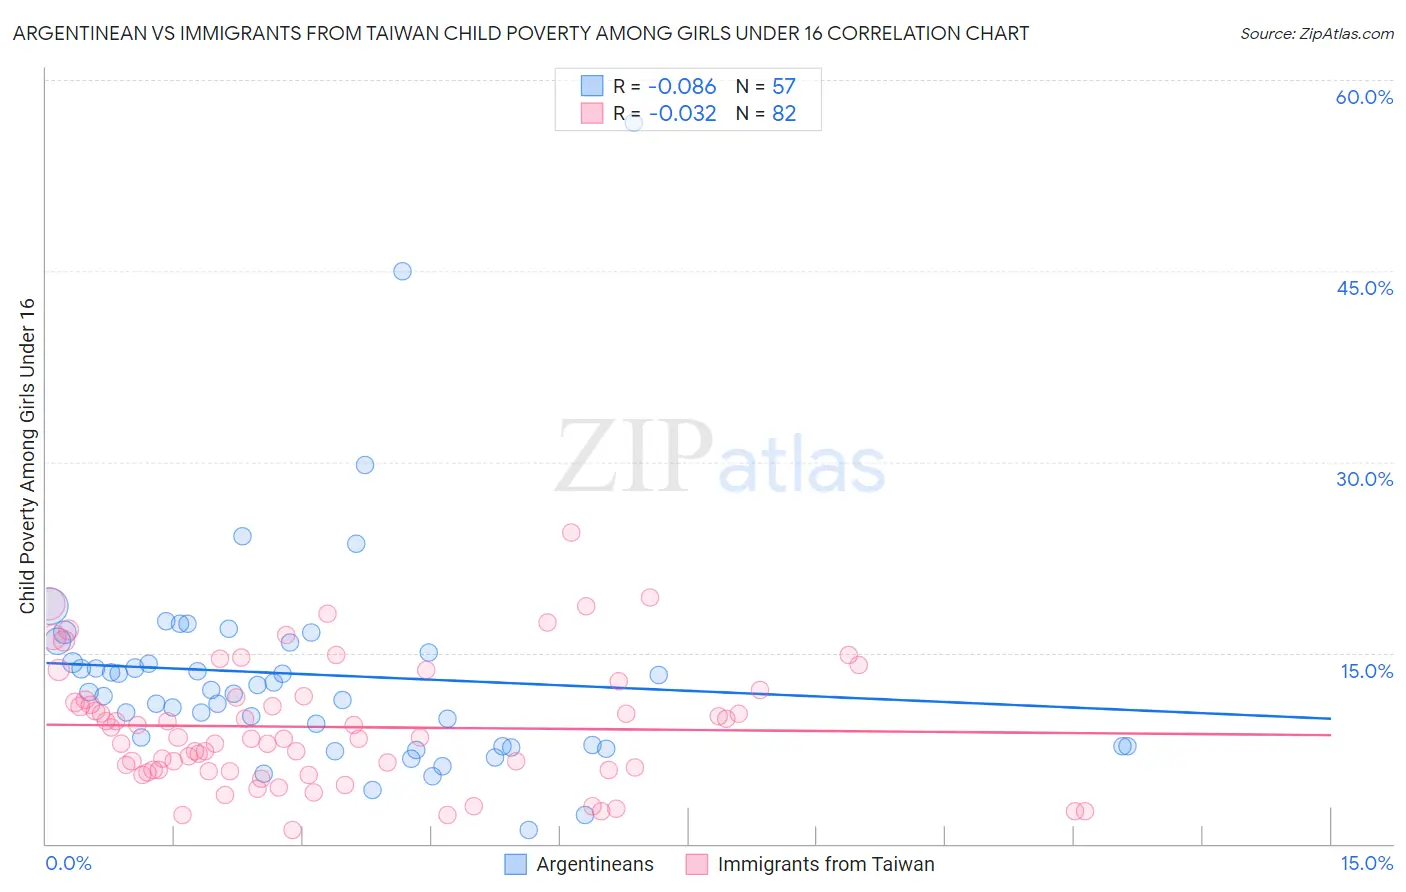 Argentinean vs Immigrants from Taiwan Child Poverty Among Girls Under 16